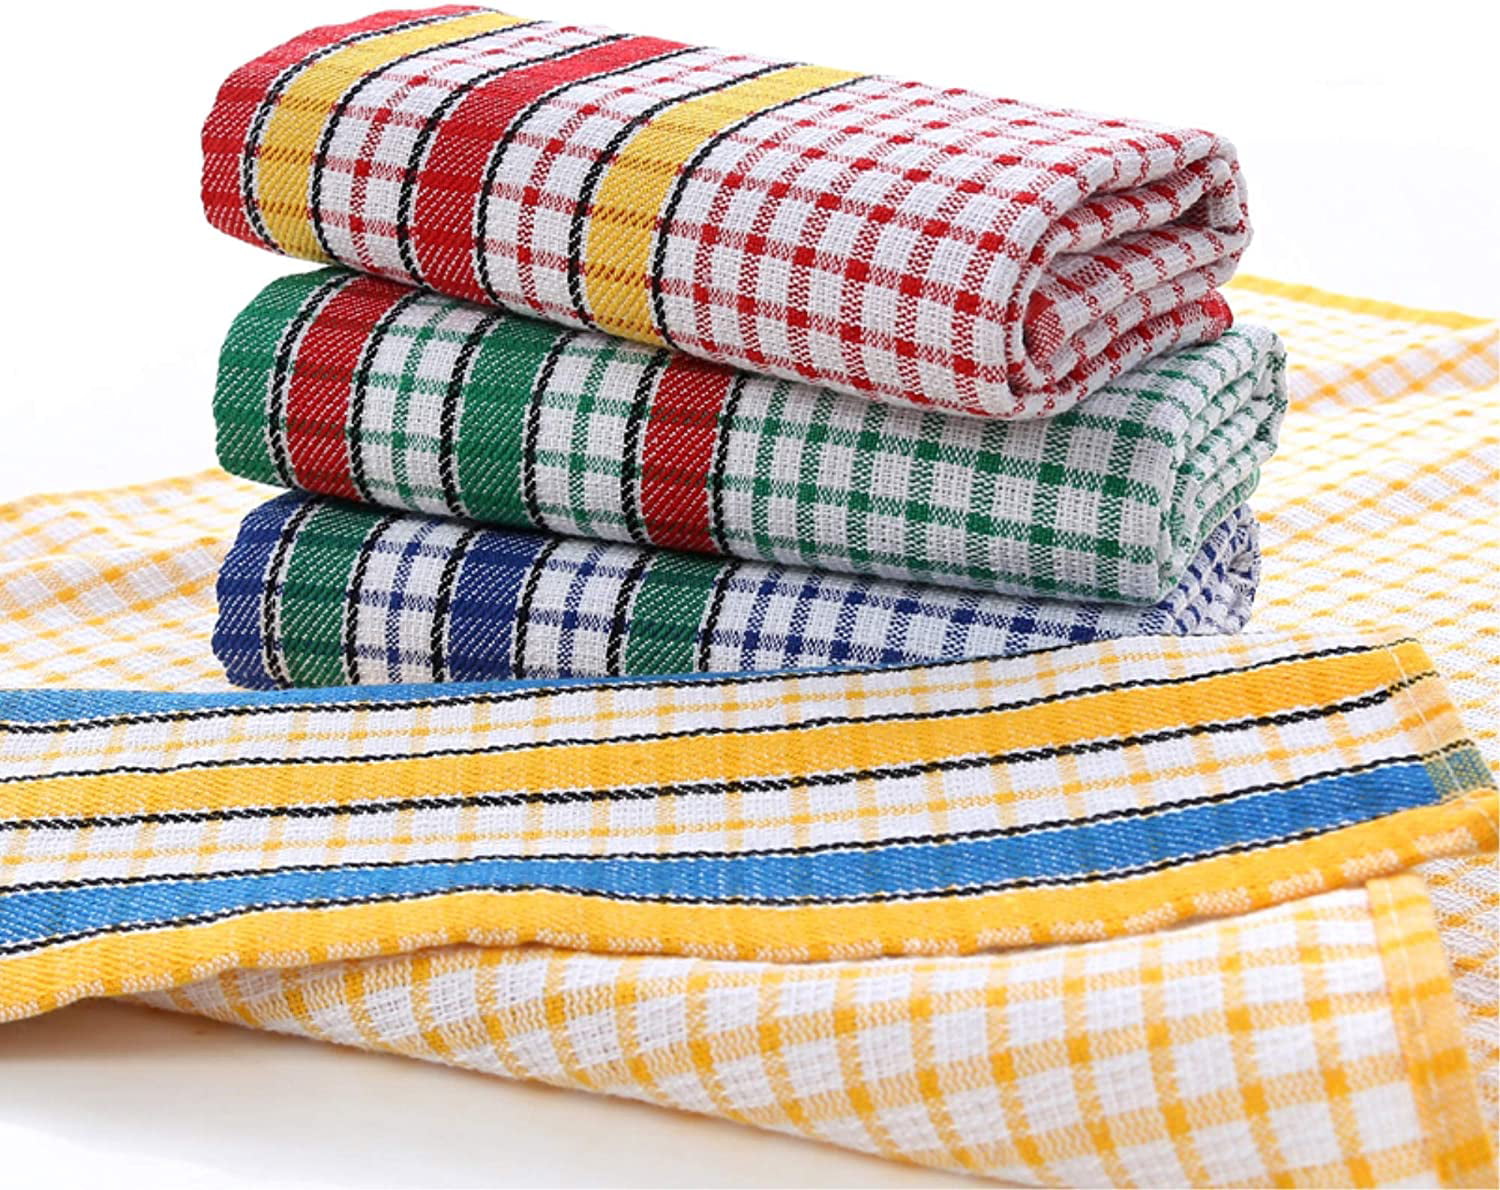  T-fal Premium Kitchen Towel (4-Pack), 16x26 Highly Absorbent,  Super Soft Long Lasting 100% Cotton Solid/Check Hand Towels, Tea Towels,  Sand : Home & Kitchen